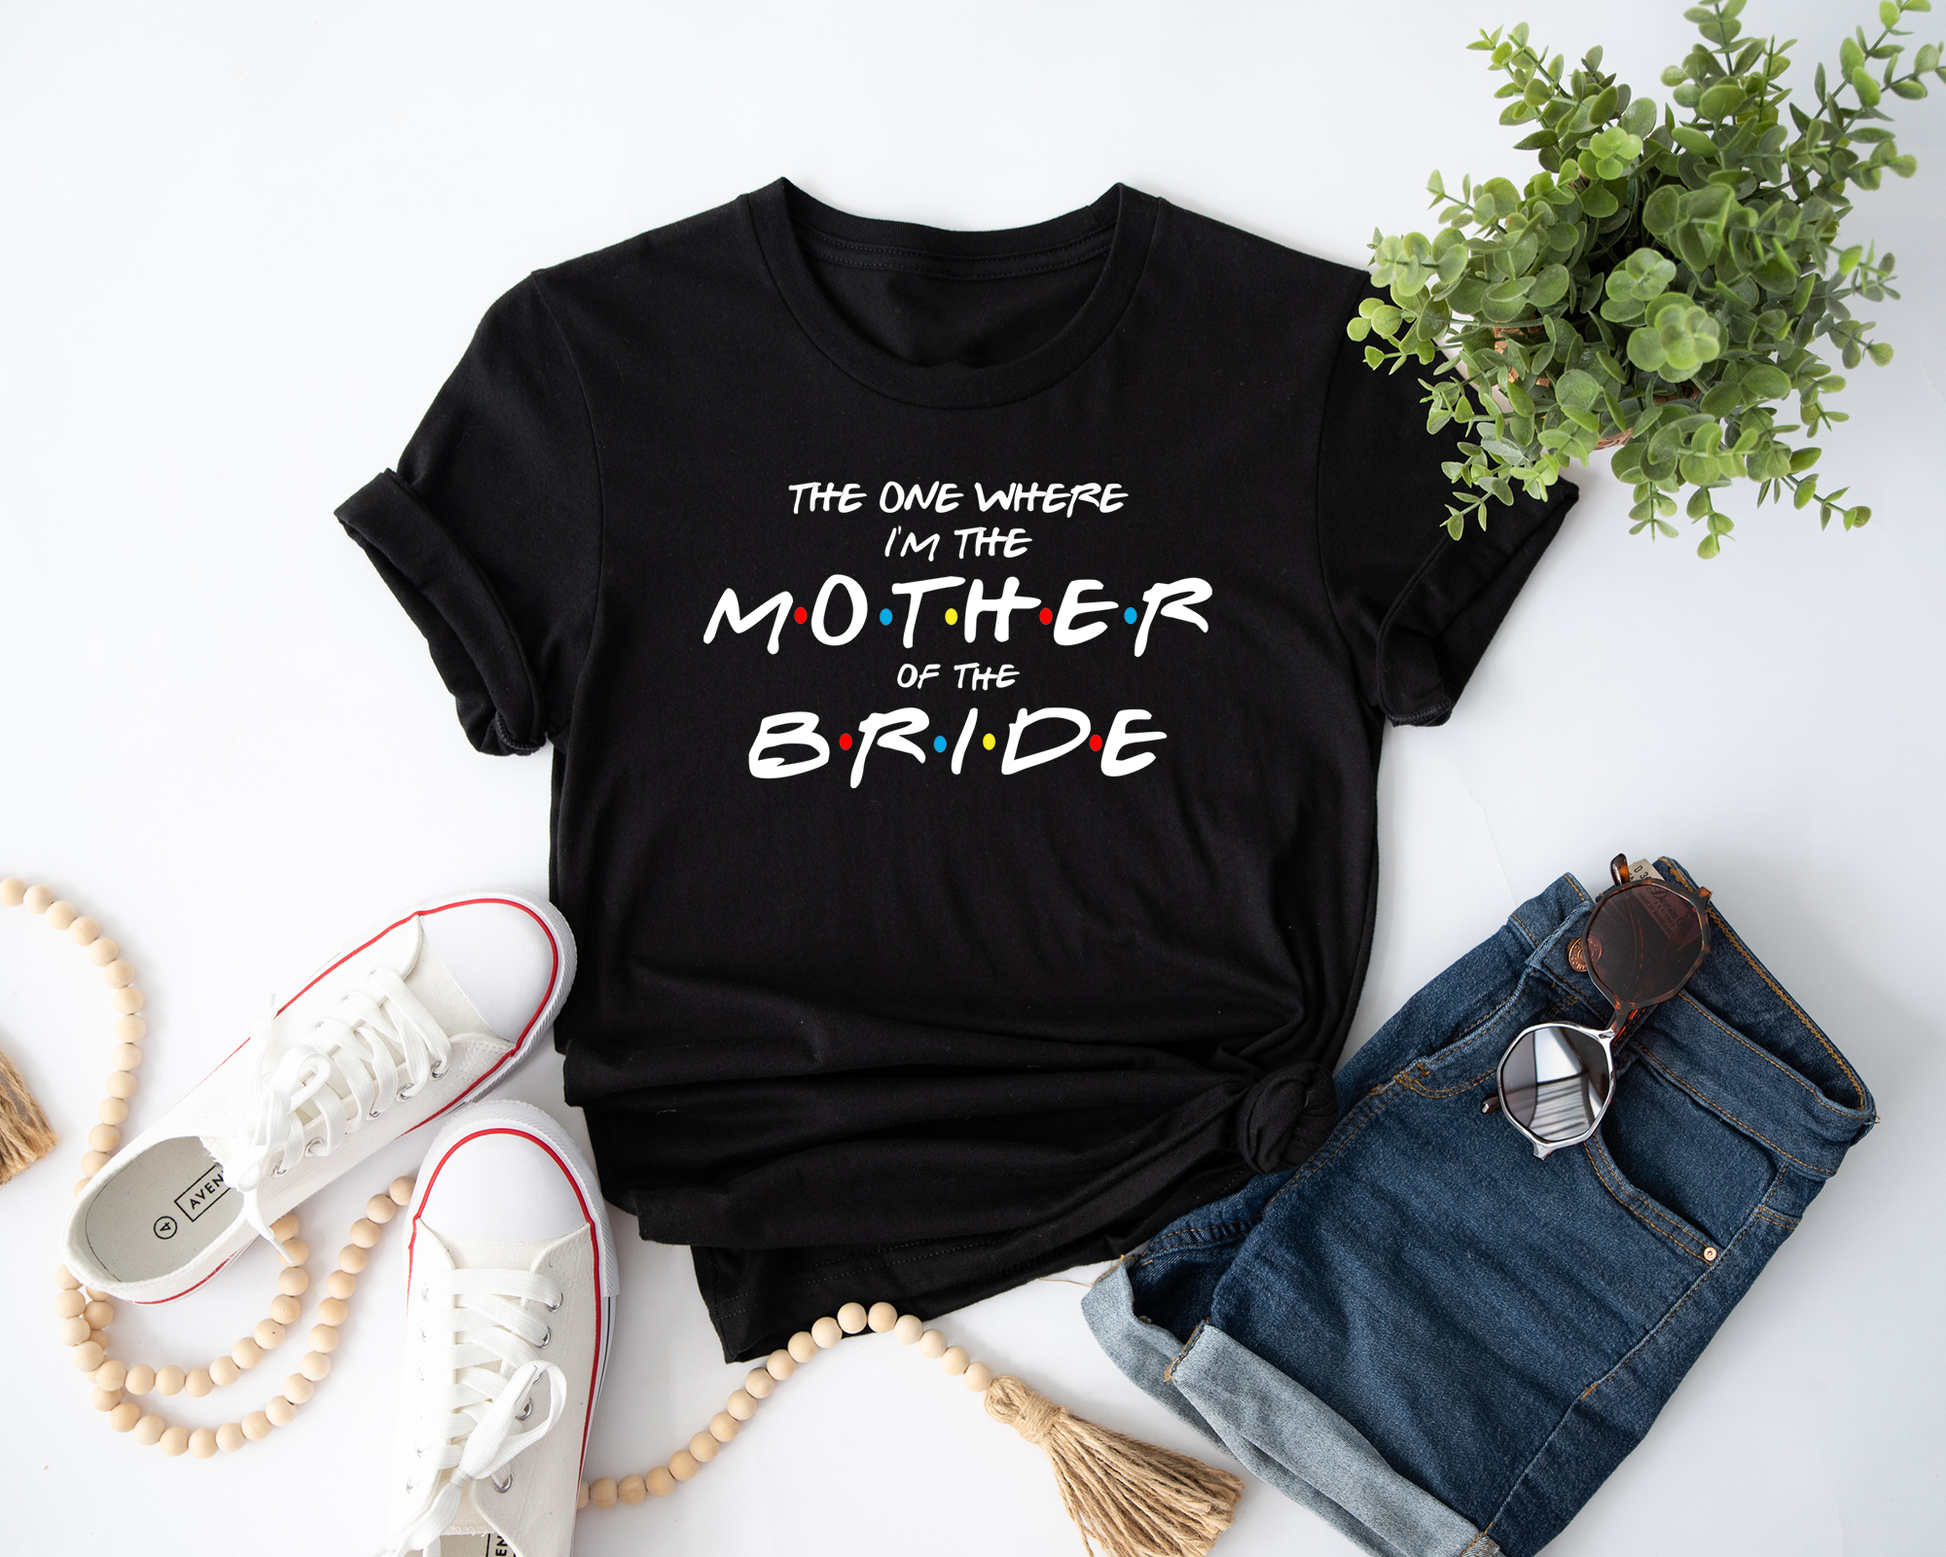 c87a6f36-9536-4901-b2eb-2ae5153a6bd2/mother_of_the_bride_white-BlackL-F.png